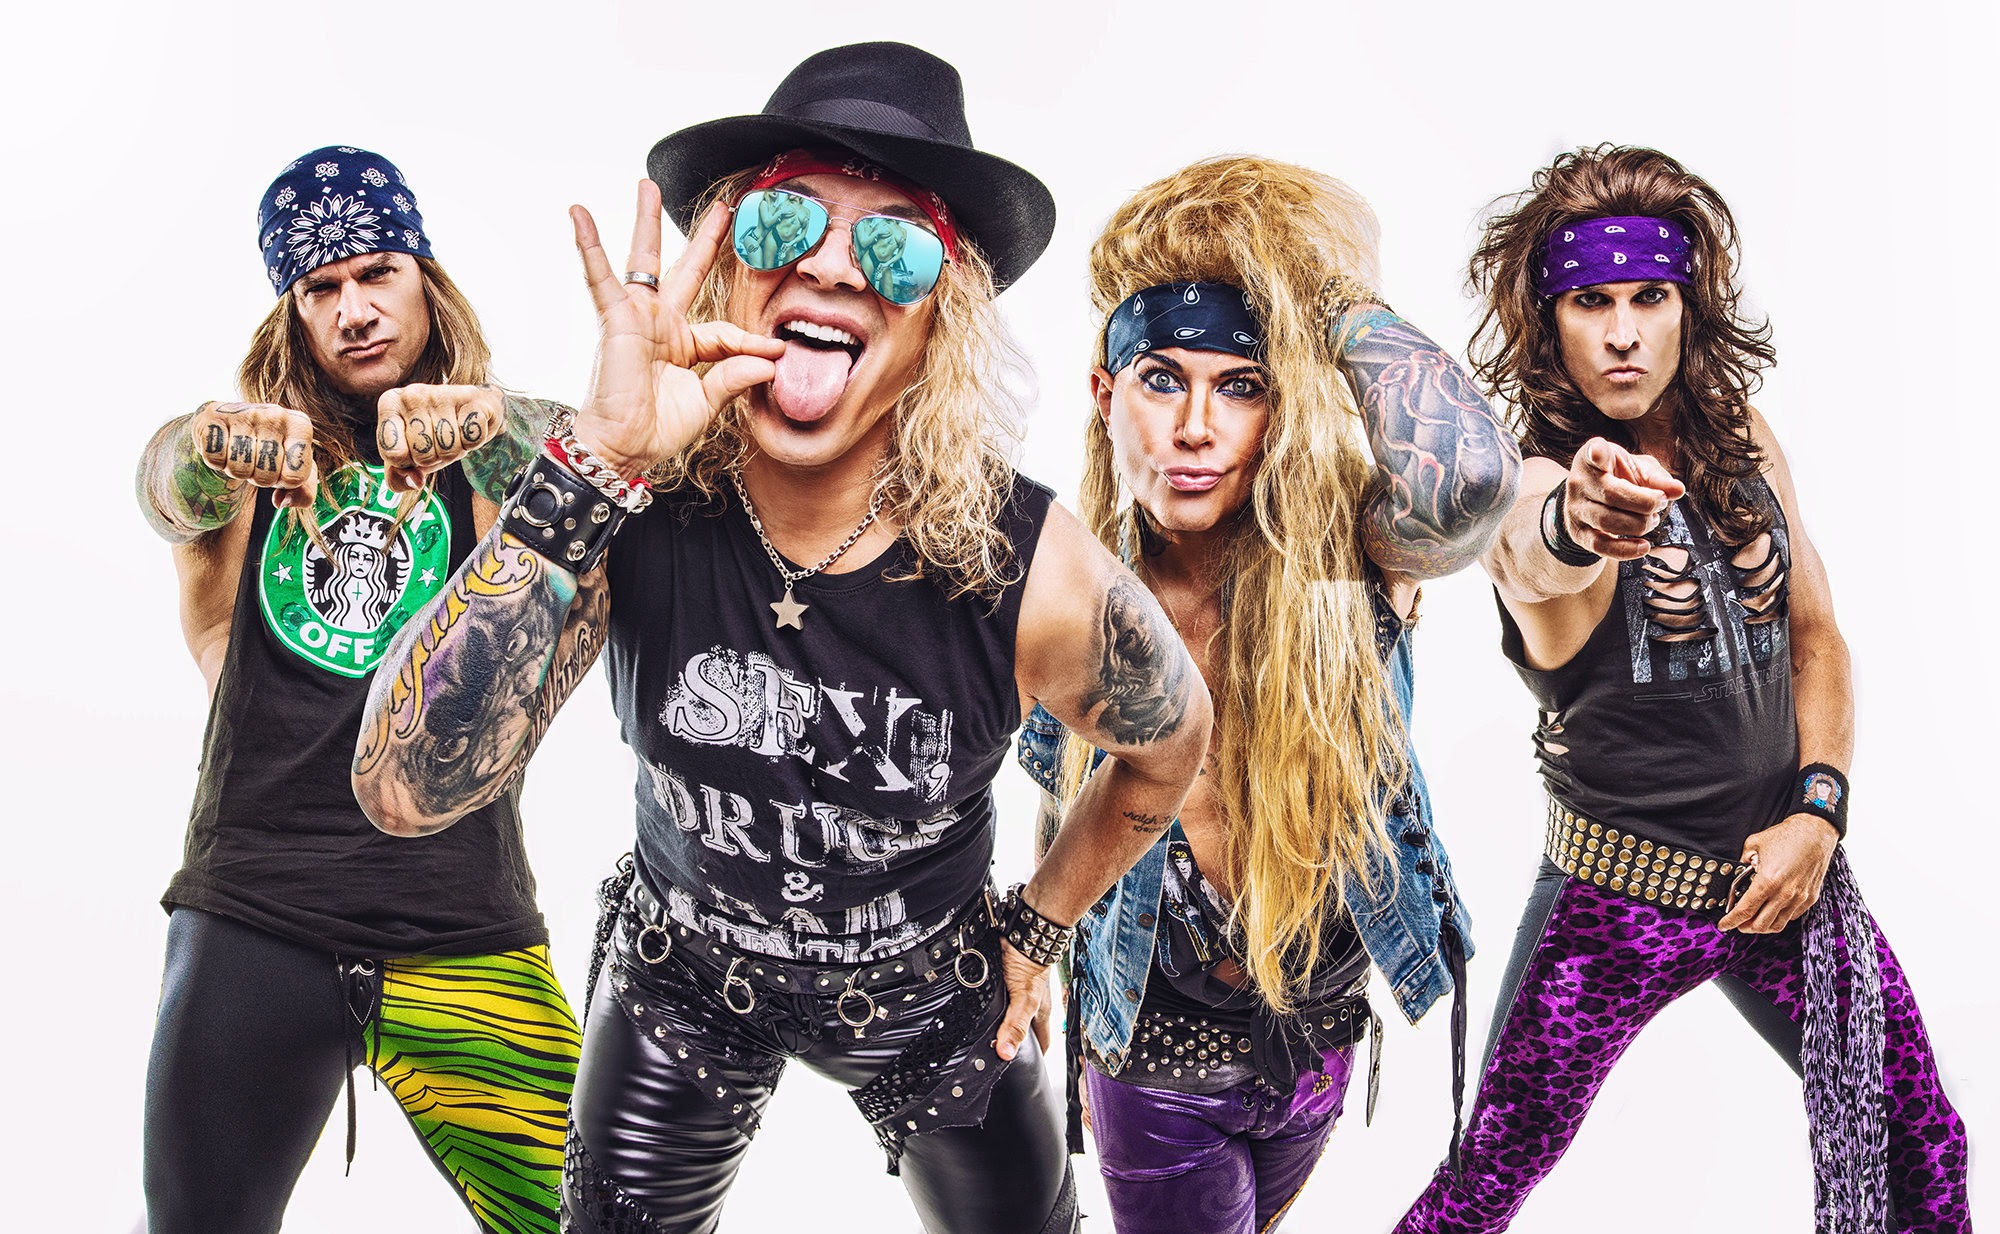 STEEL PANTHER: potremmo fare un EP